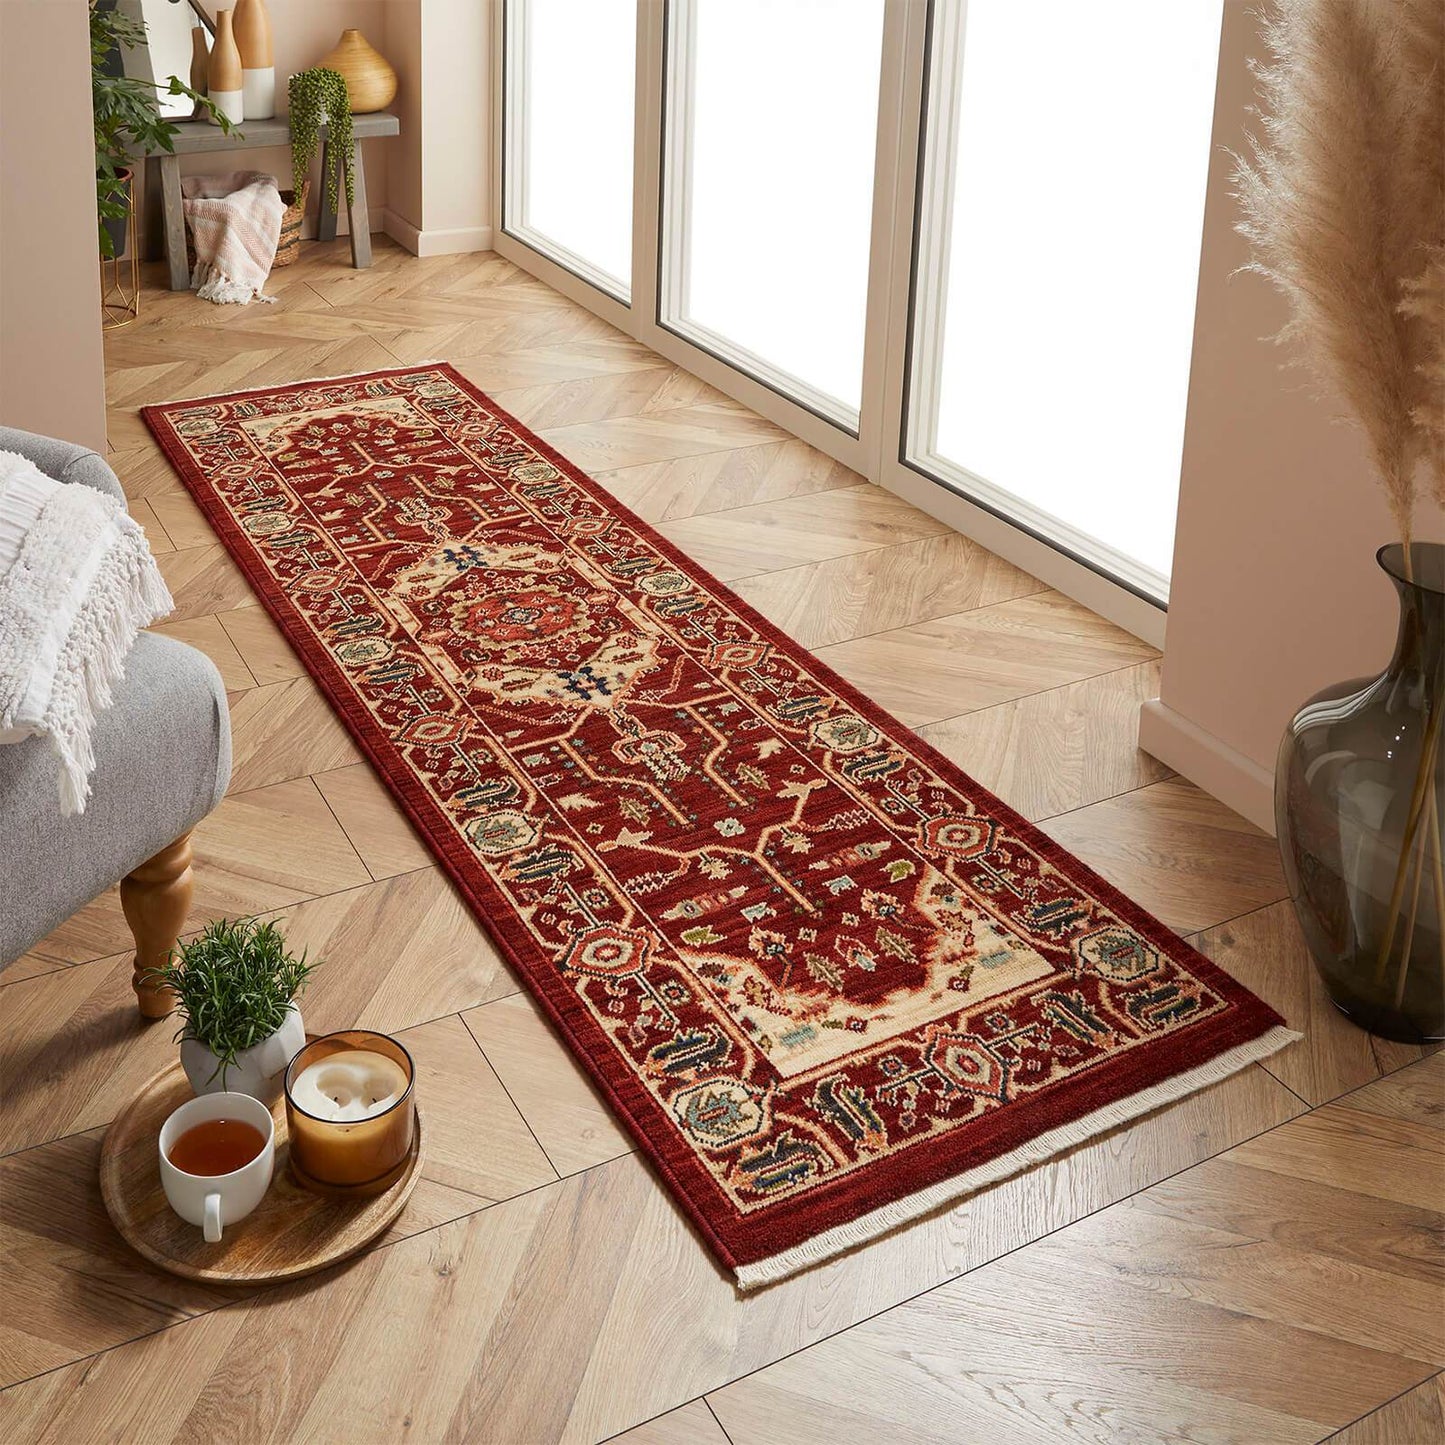 Nomad 1801 X Multicoloured Traditional Rugs